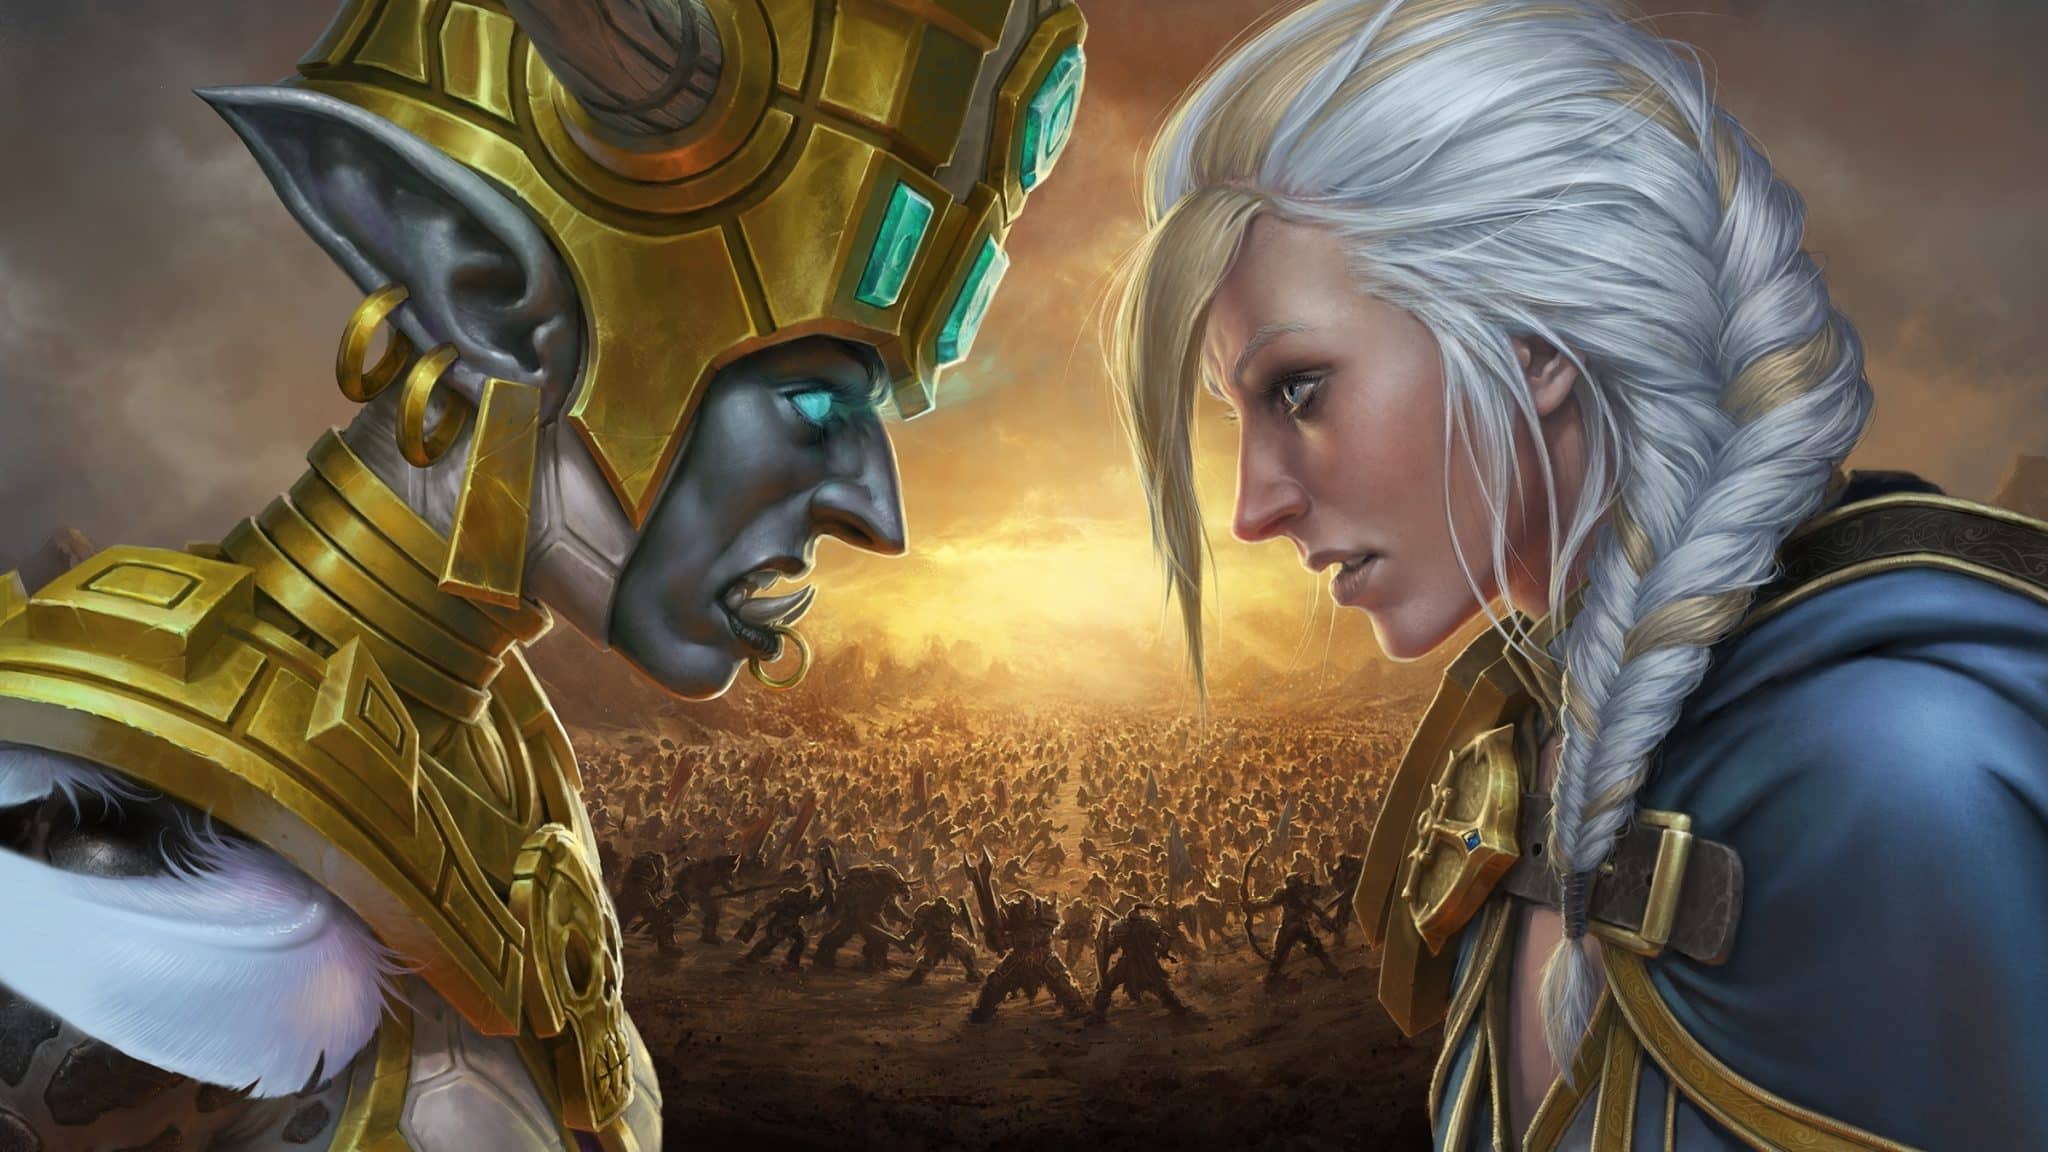 April 30 Heroes of The Storm patch notes add Anduin Wrynn